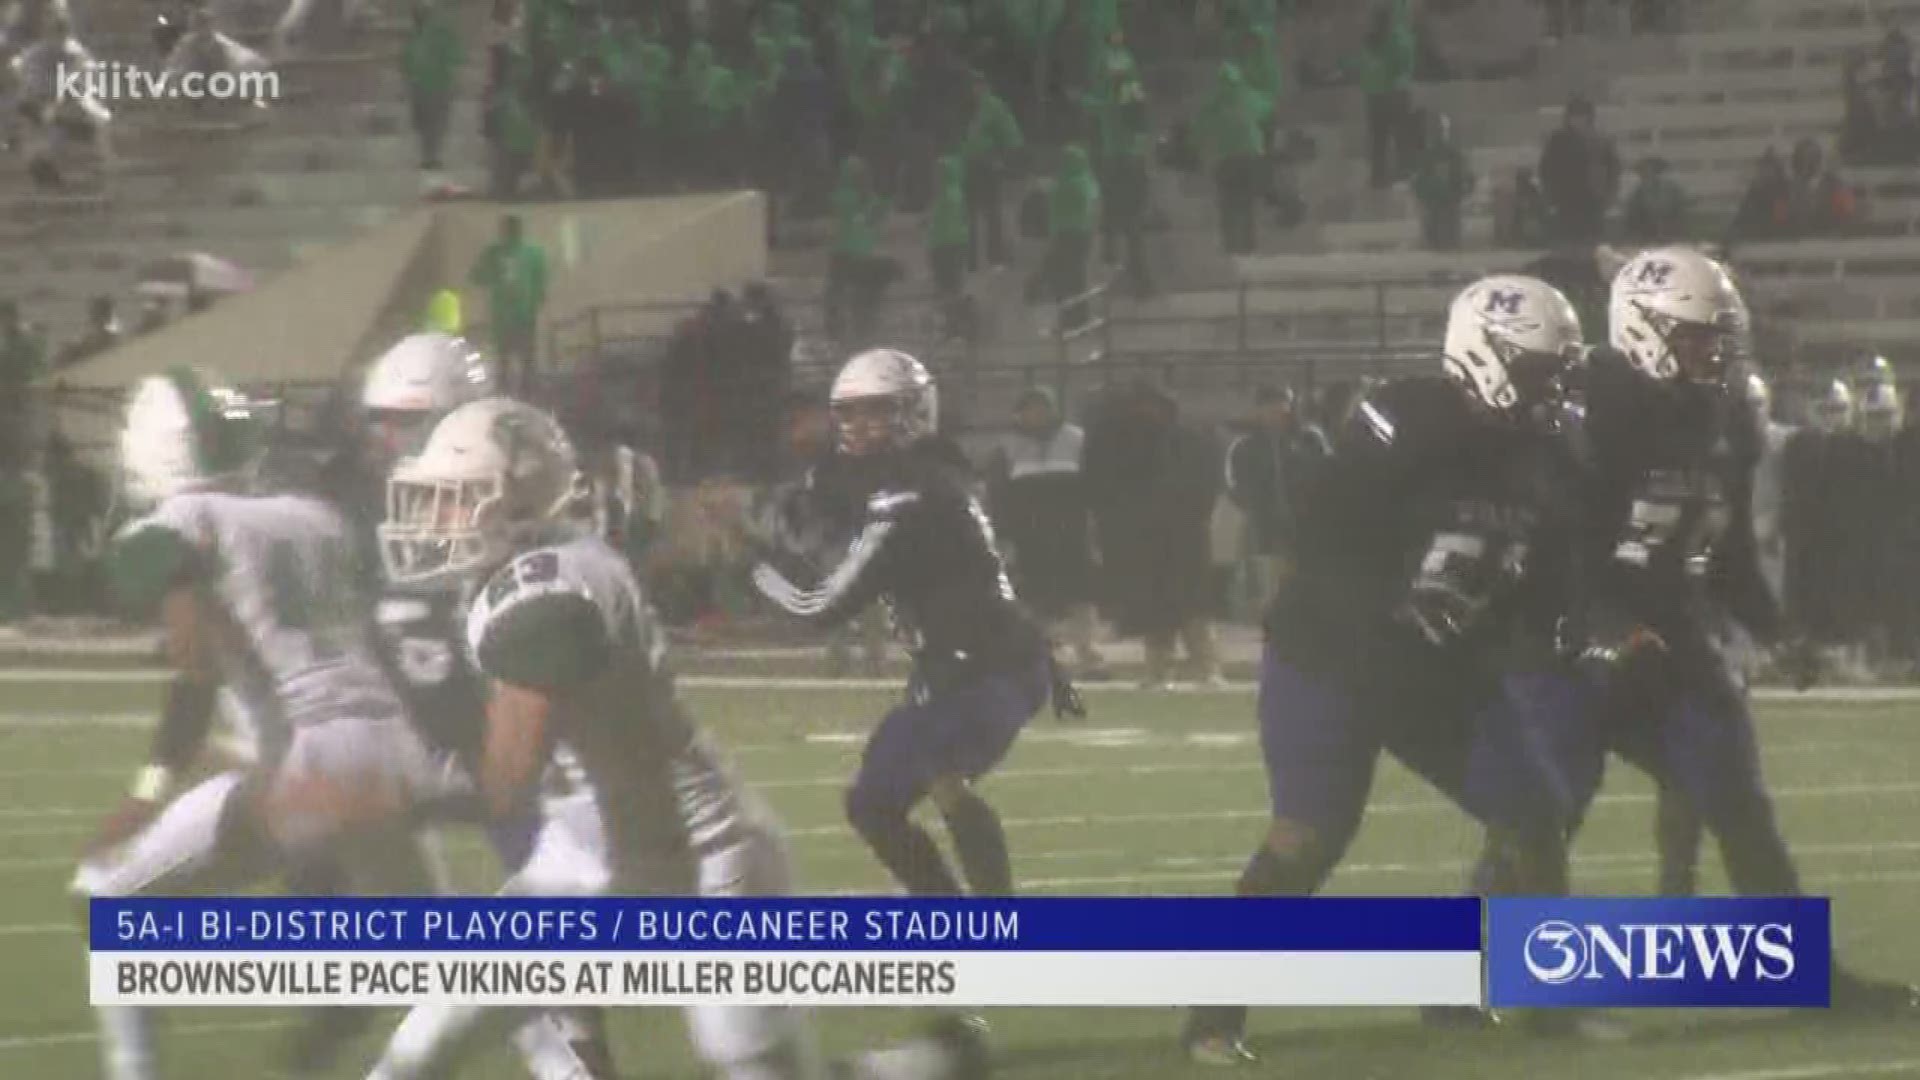 The Bucs needed every second to beat the Vikings 28-21 and advance. Meanwhile Rockport-Fulton got the scoring started early and didn't look back in a 61-0 win.